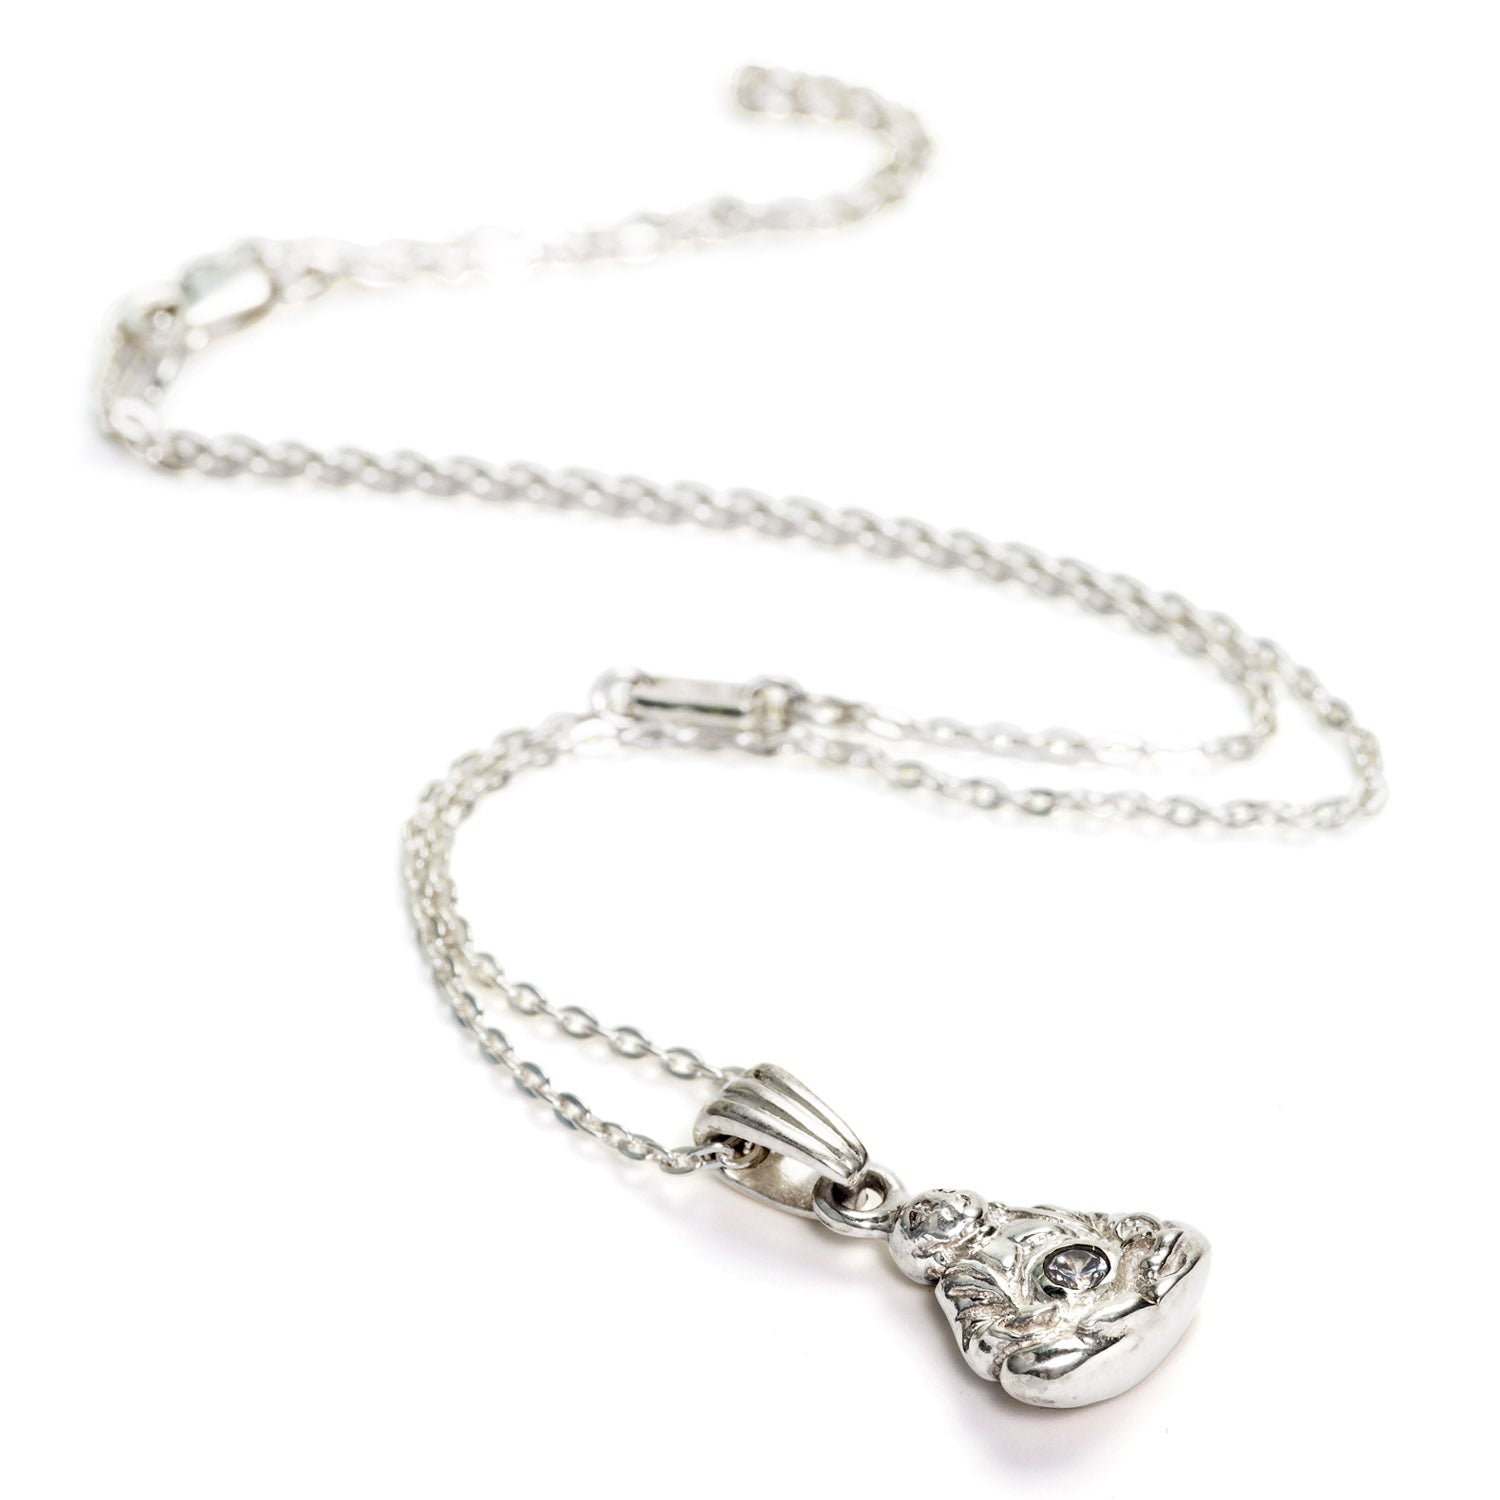  God of Luck Buddhai necklace silver by ETERNAL BLISS - Spiritual Jewellery